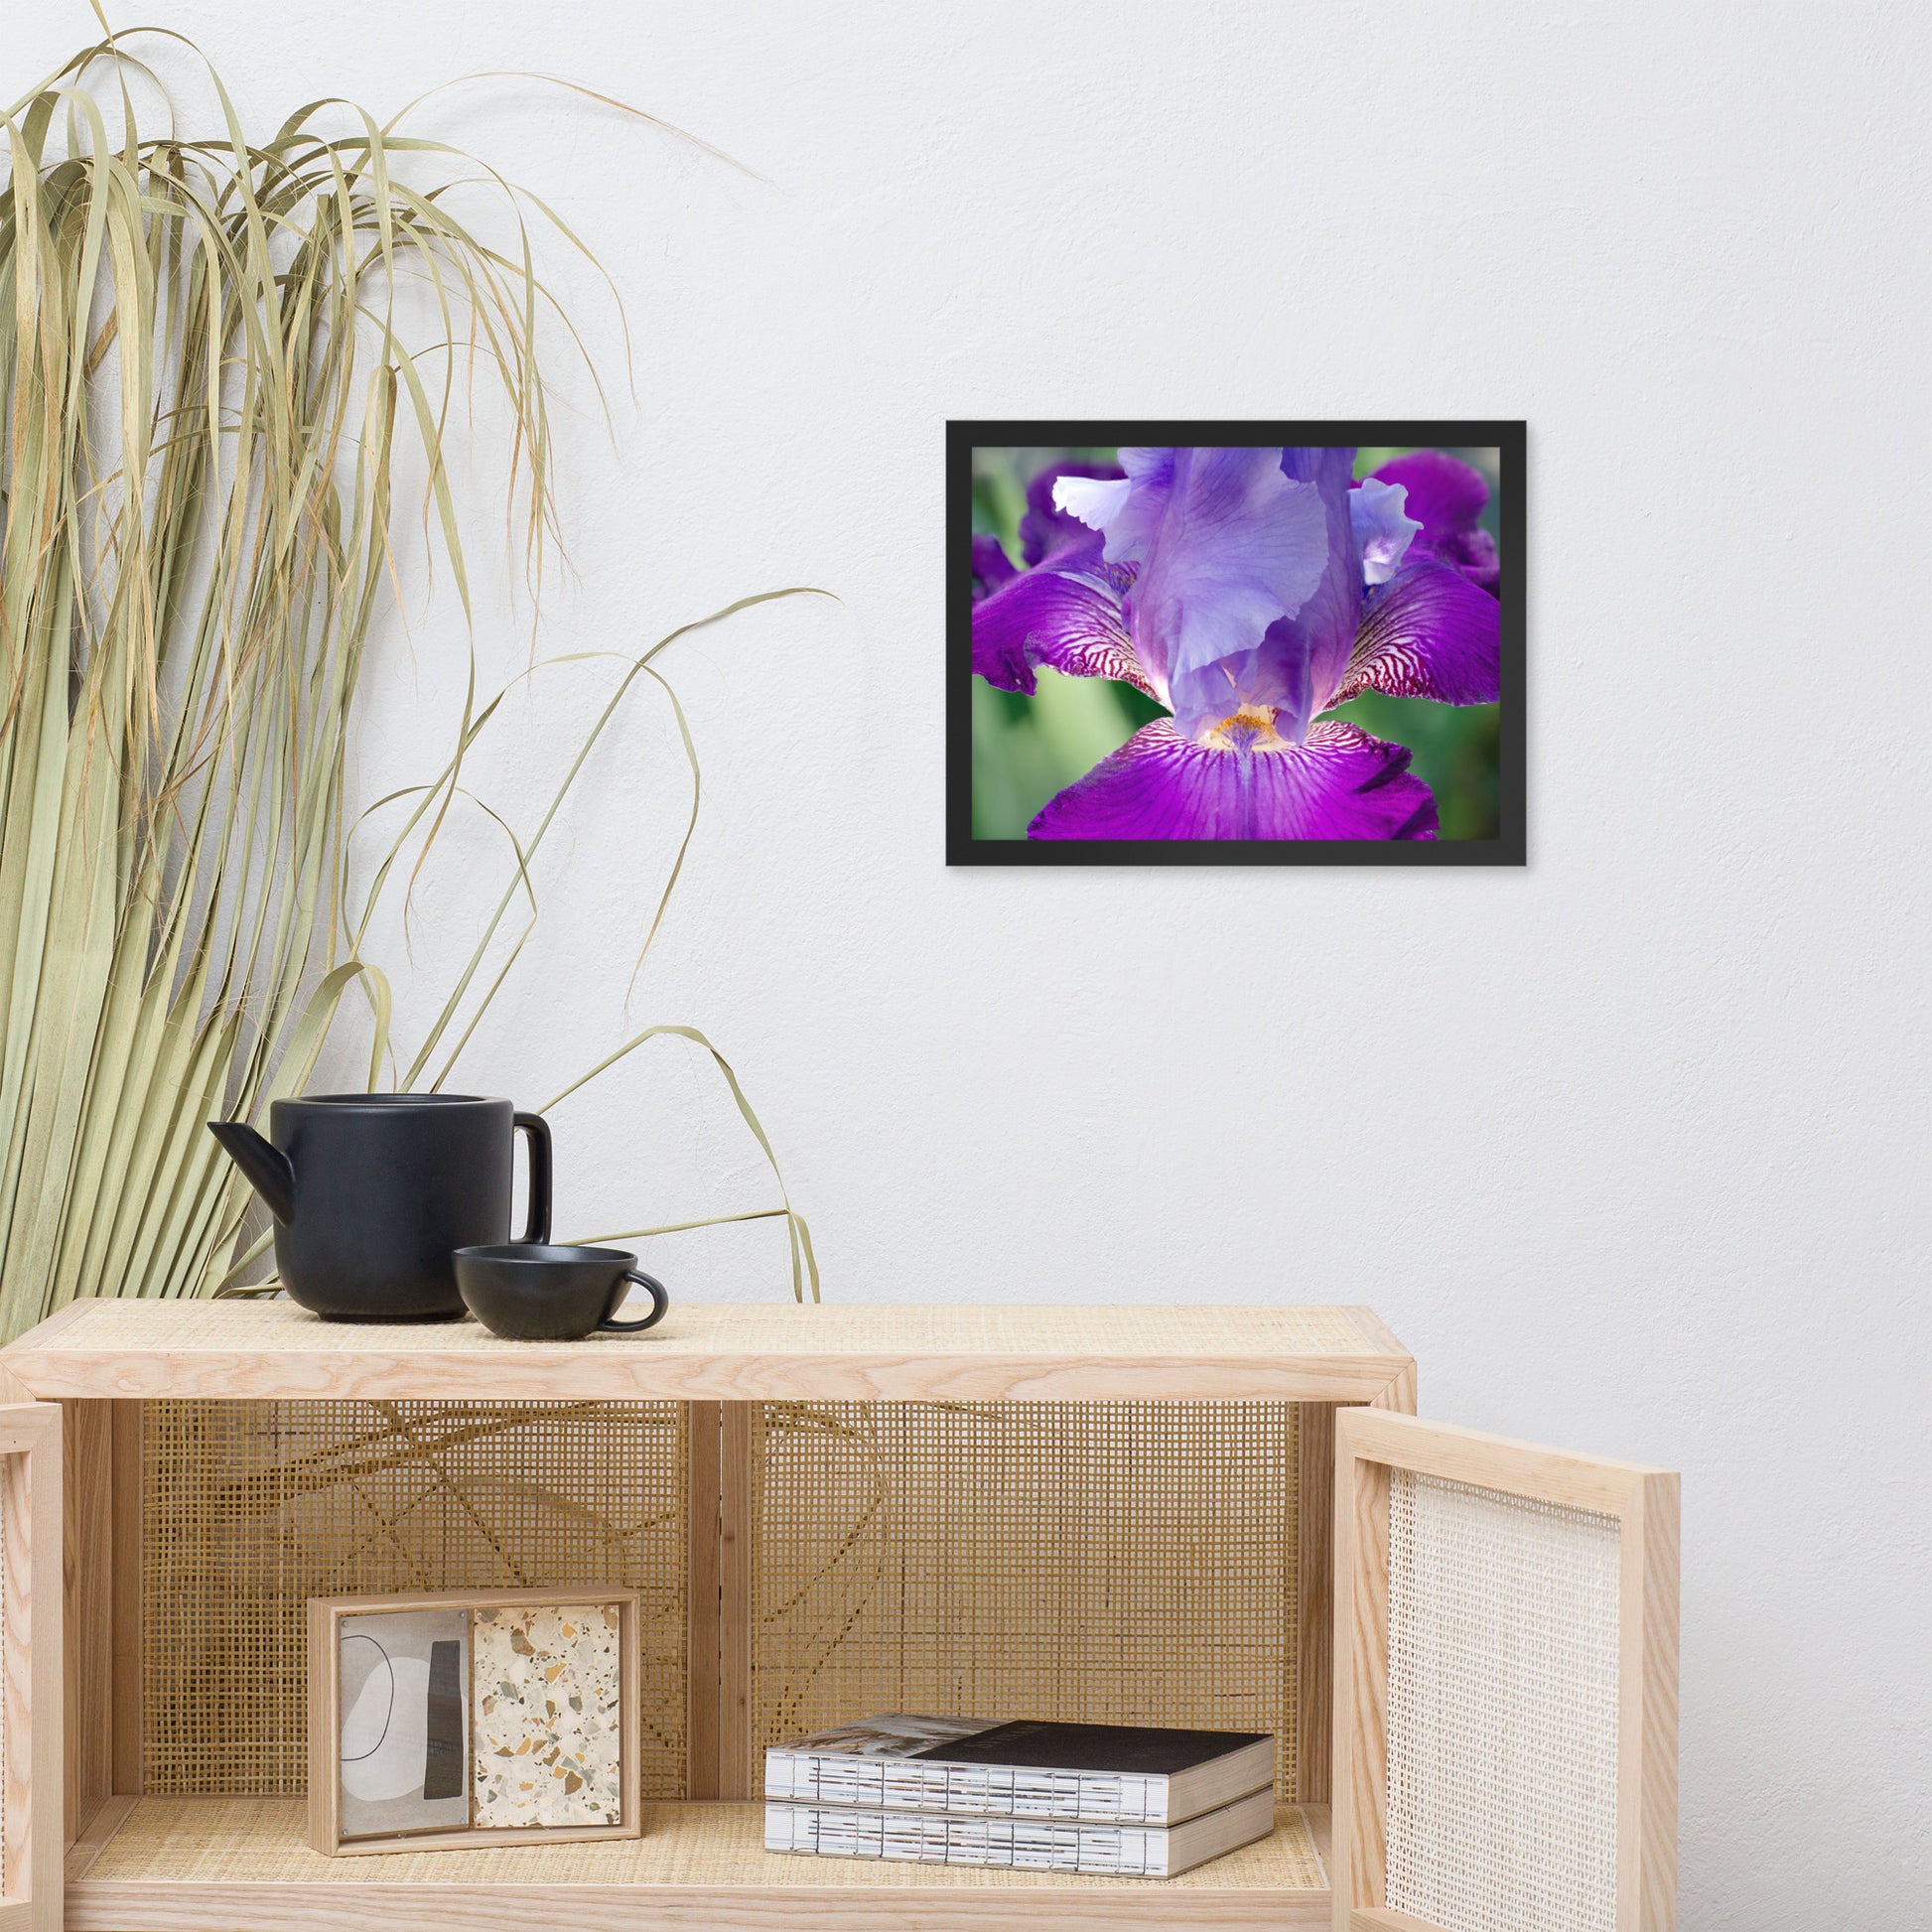 Small Pictures For Bedroom: Glowing Iris - Floral / Botanical / Nature Photo Framed Wall Art Print - Artwork - Wall Decor - Modern Home Decor